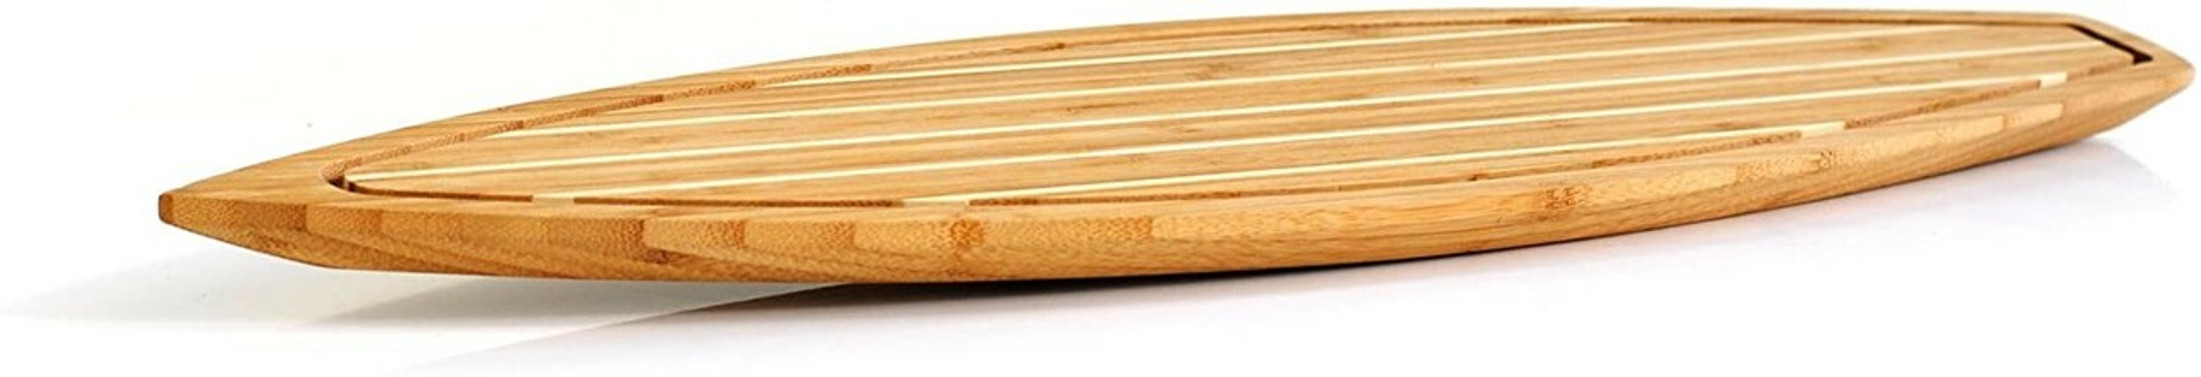 XXD's (#Y0350) Bamboo Skerry Cruiser Cutting Board, nearly 23.5" long